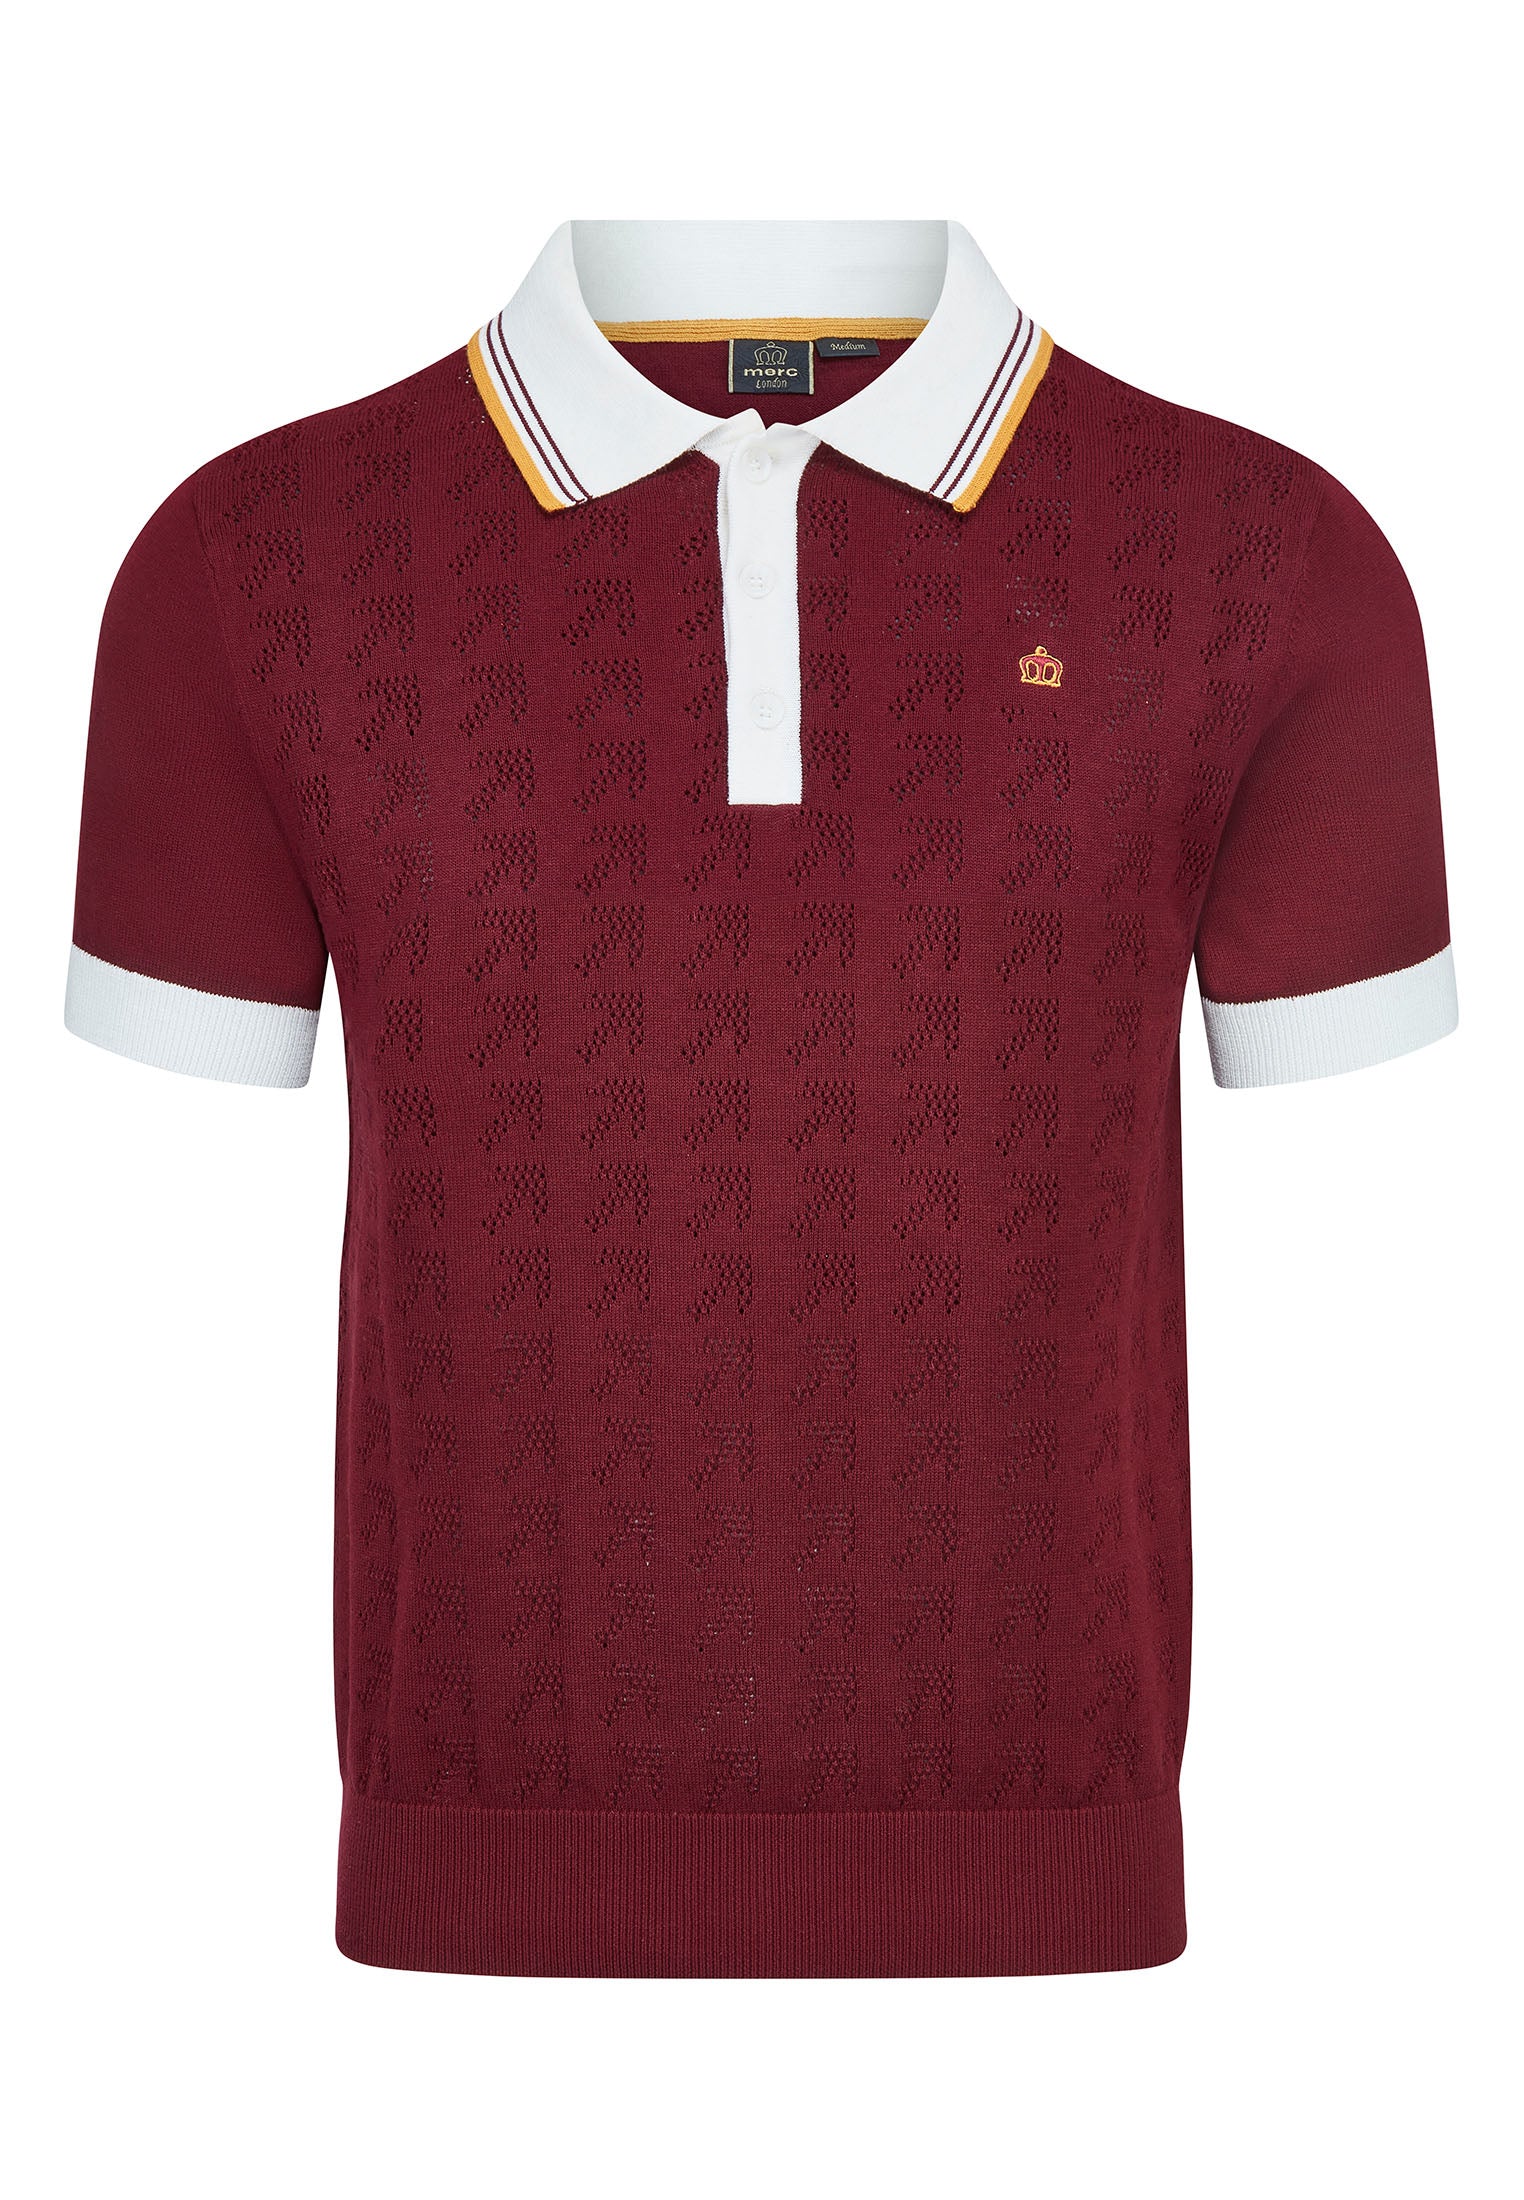 Pointelle Knitted Polo Shirt by Merc